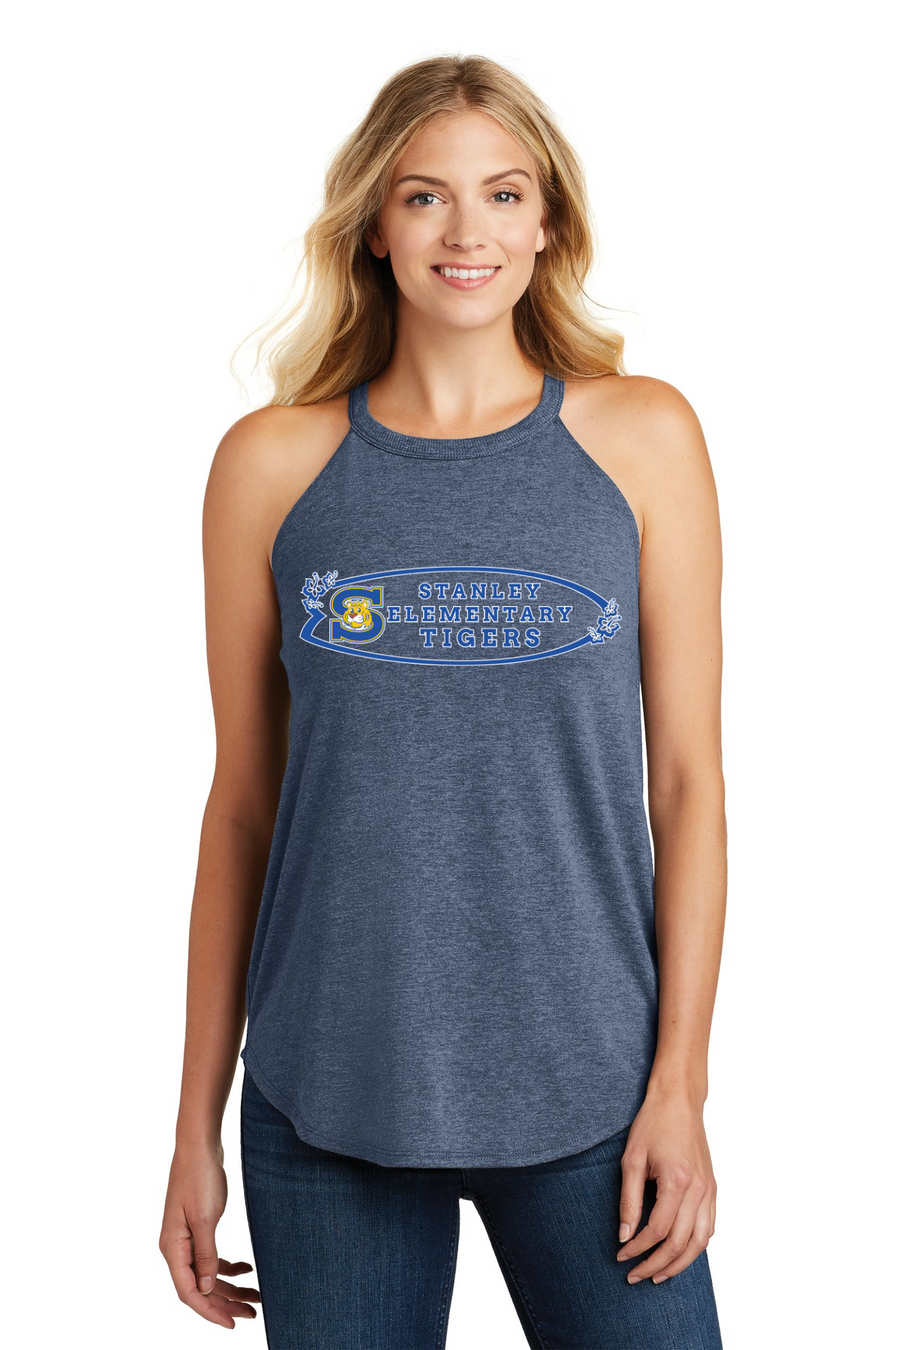 The Tiger Store - Stanley Elementary 2023/24 On-Demand-District Womens Perfect Tri Rocker Tank Surf Board Logo